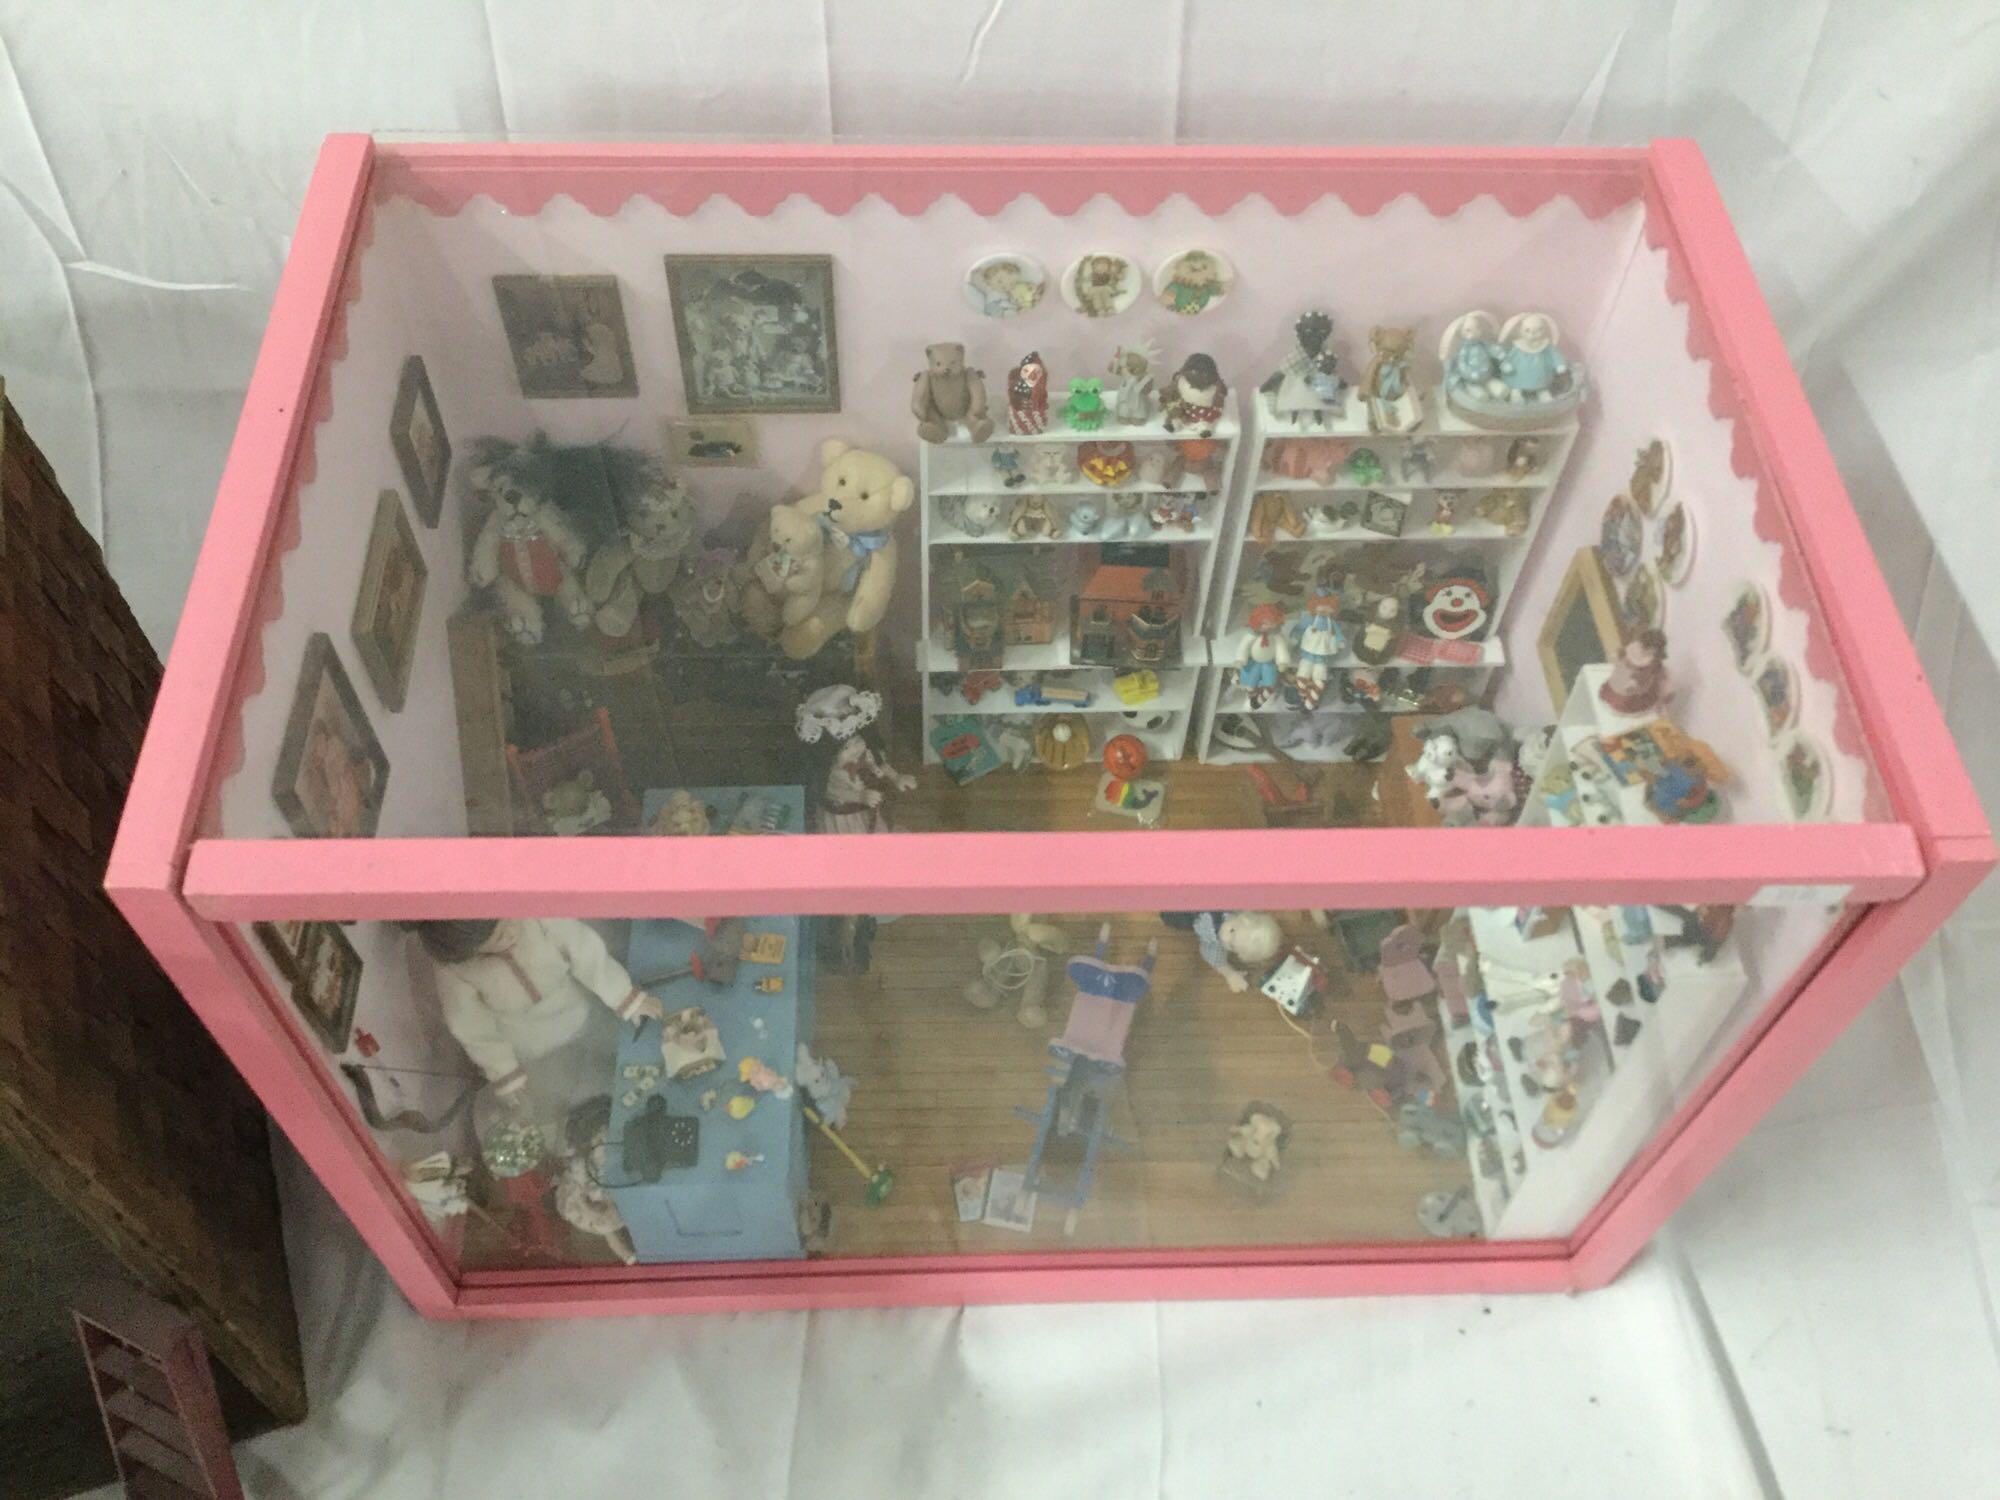 Miniature toy store window box display with doll figures plus doll sized workshop w/ tools